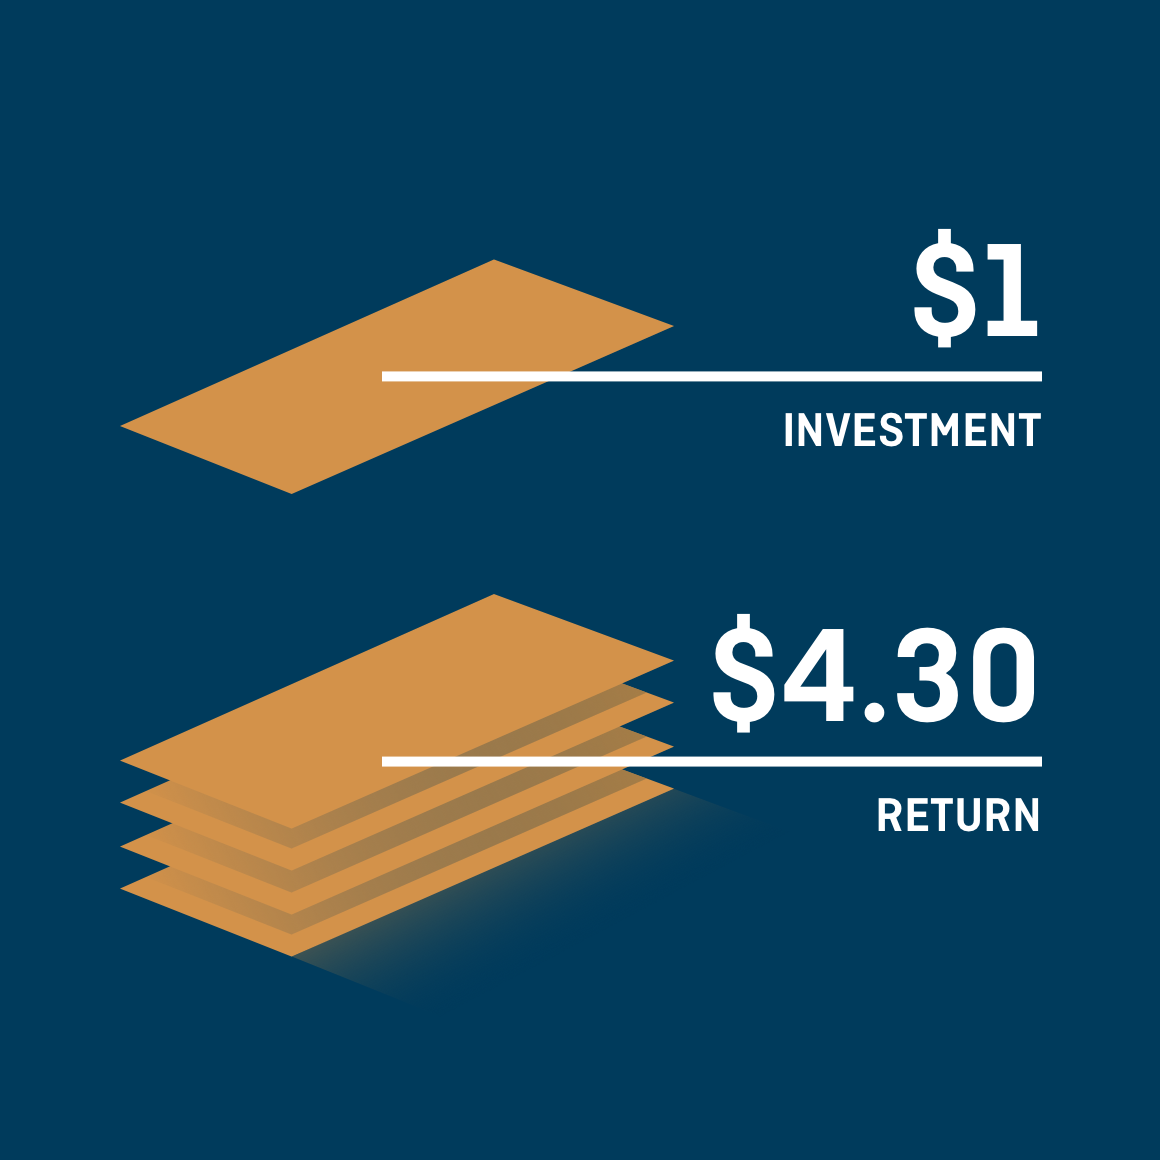 Graphic showing $3.30 return on investment